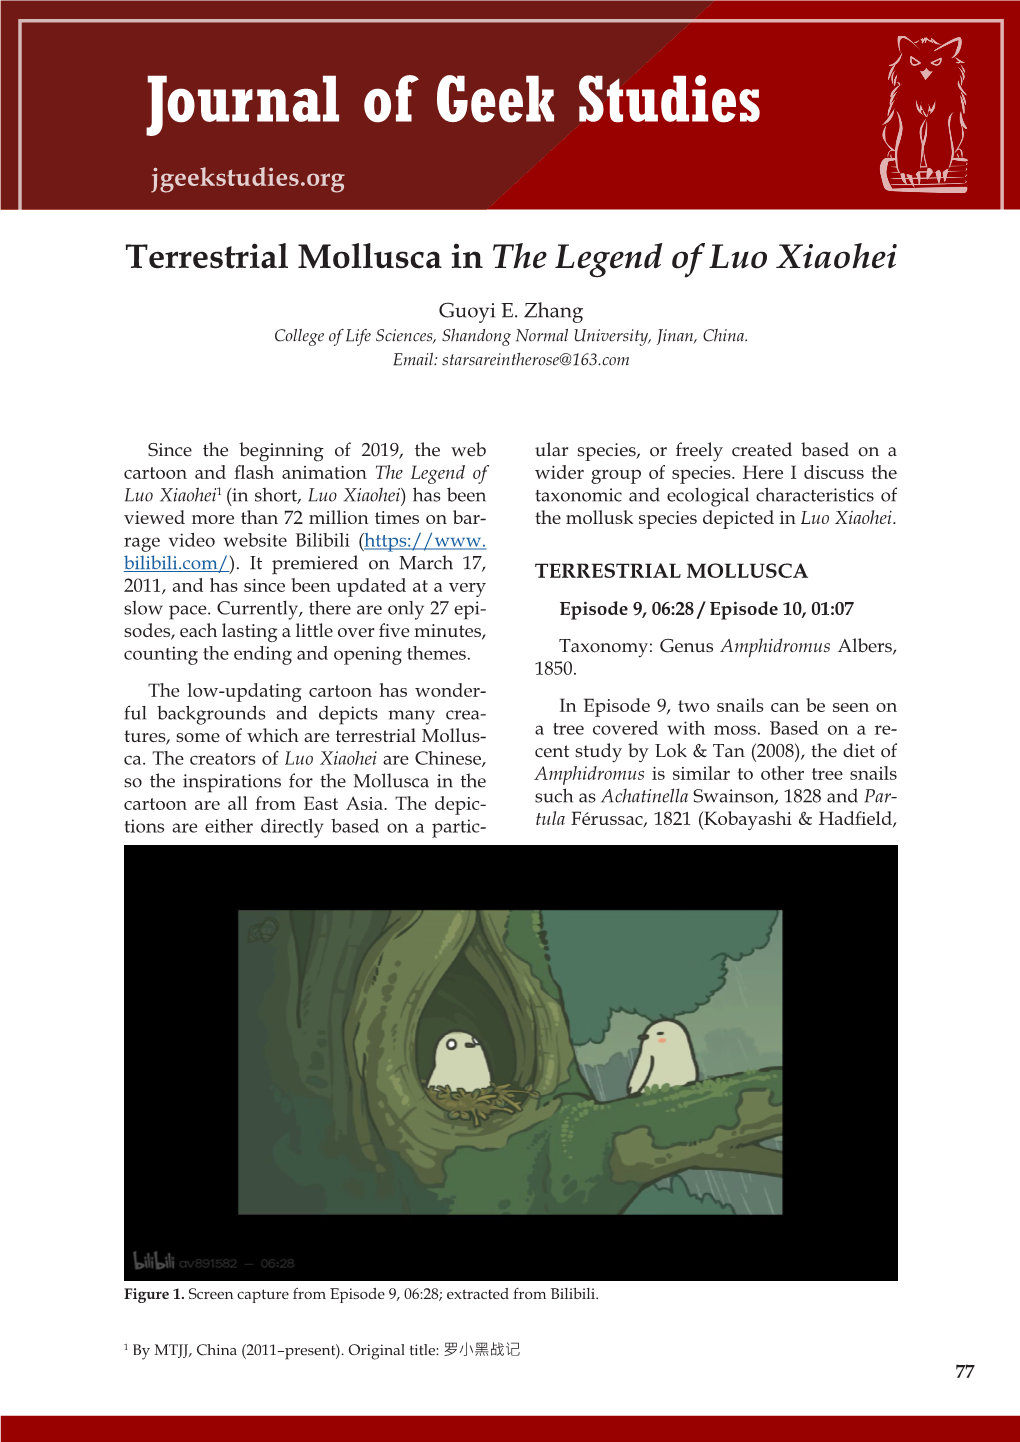 Terrestrial Mollusca in the Legend of Luo Xiaohei